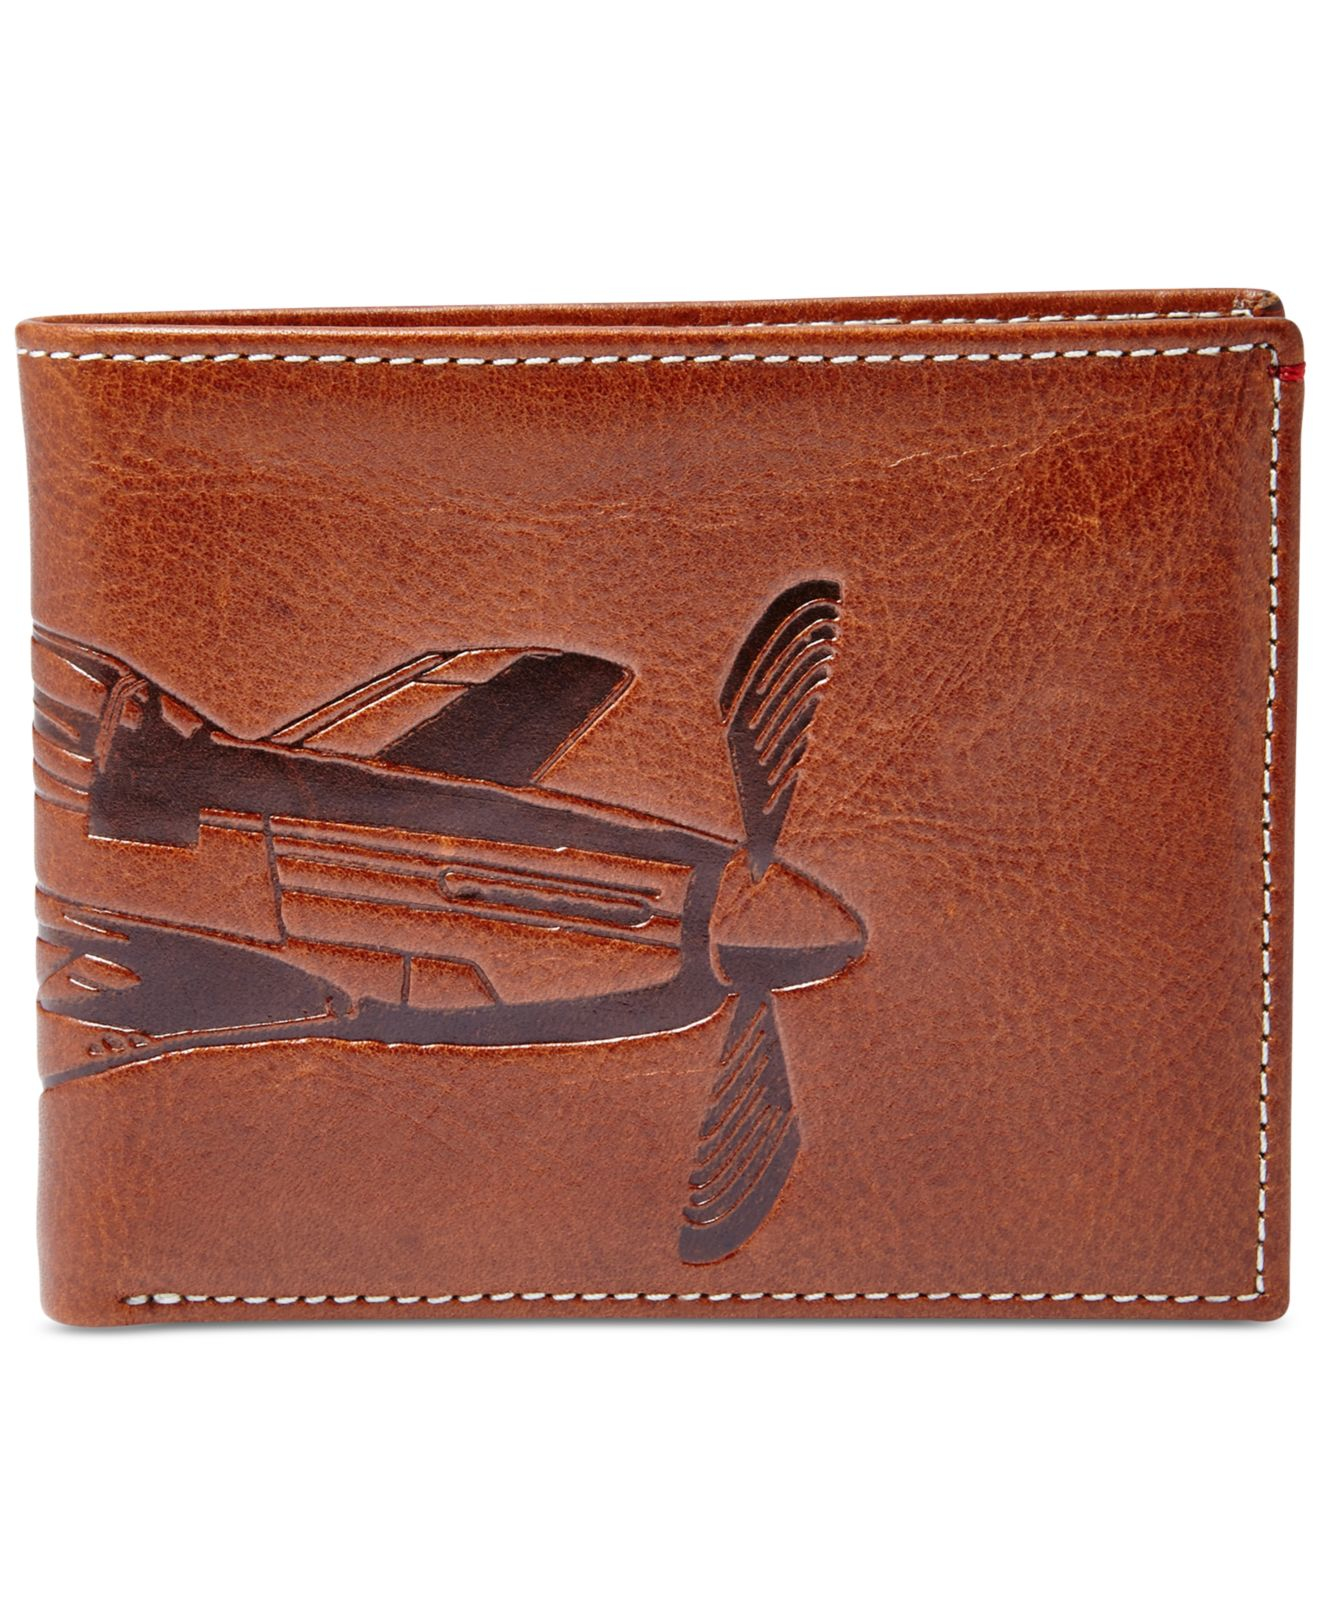 Lyst - Fossil Danny Leather Zip Bifold Wallet in Brown for Men